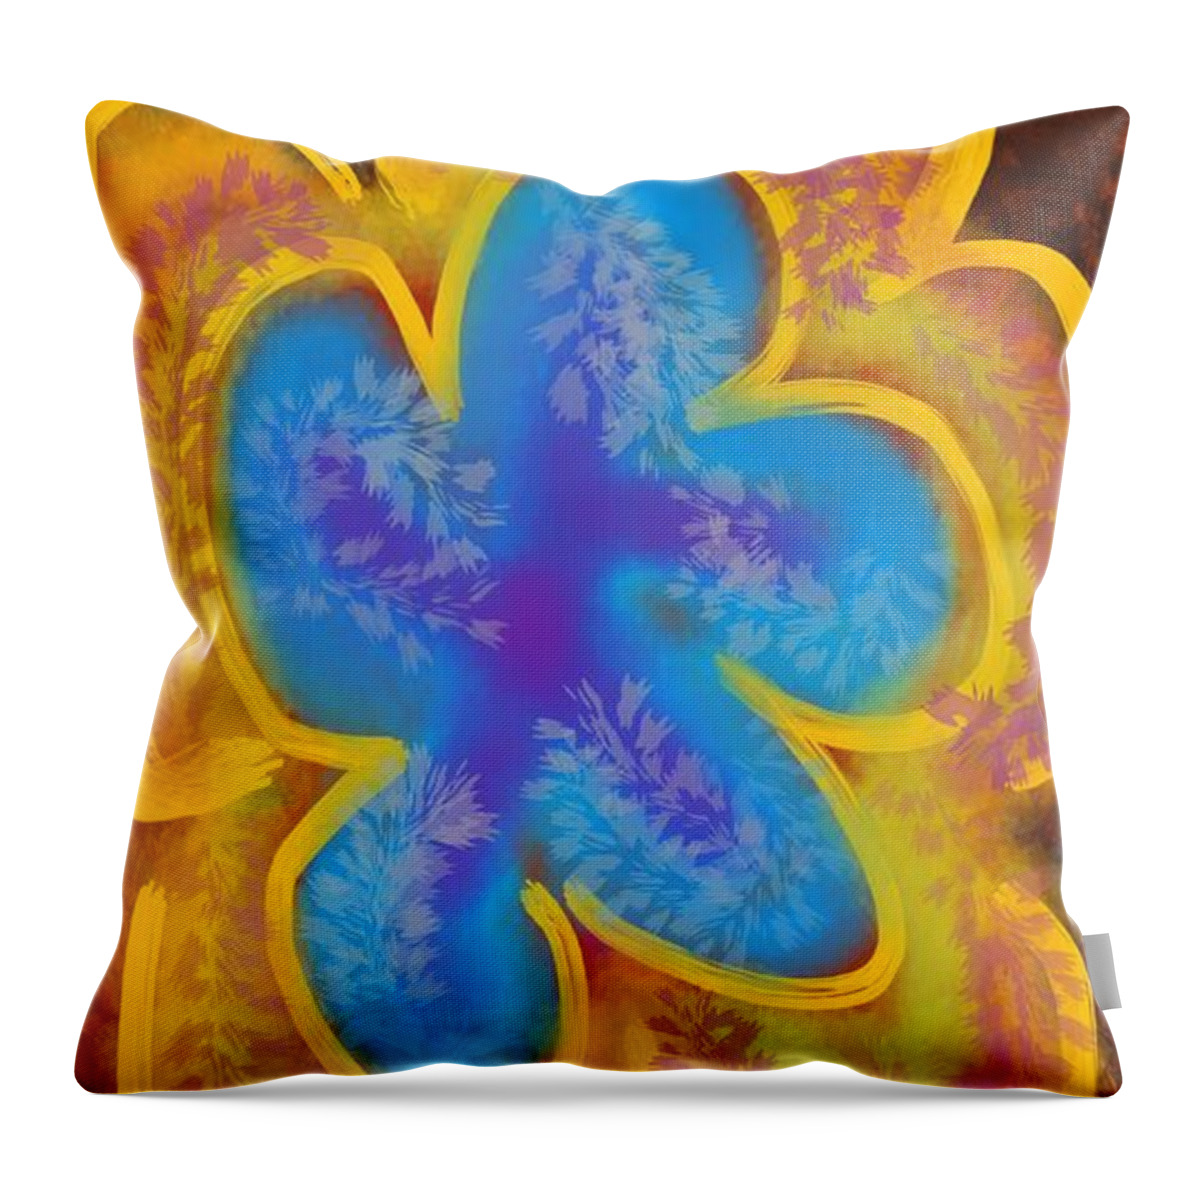 Blue Throw Pillow featuring the digital art Expansion by Ljev Rjadcenko